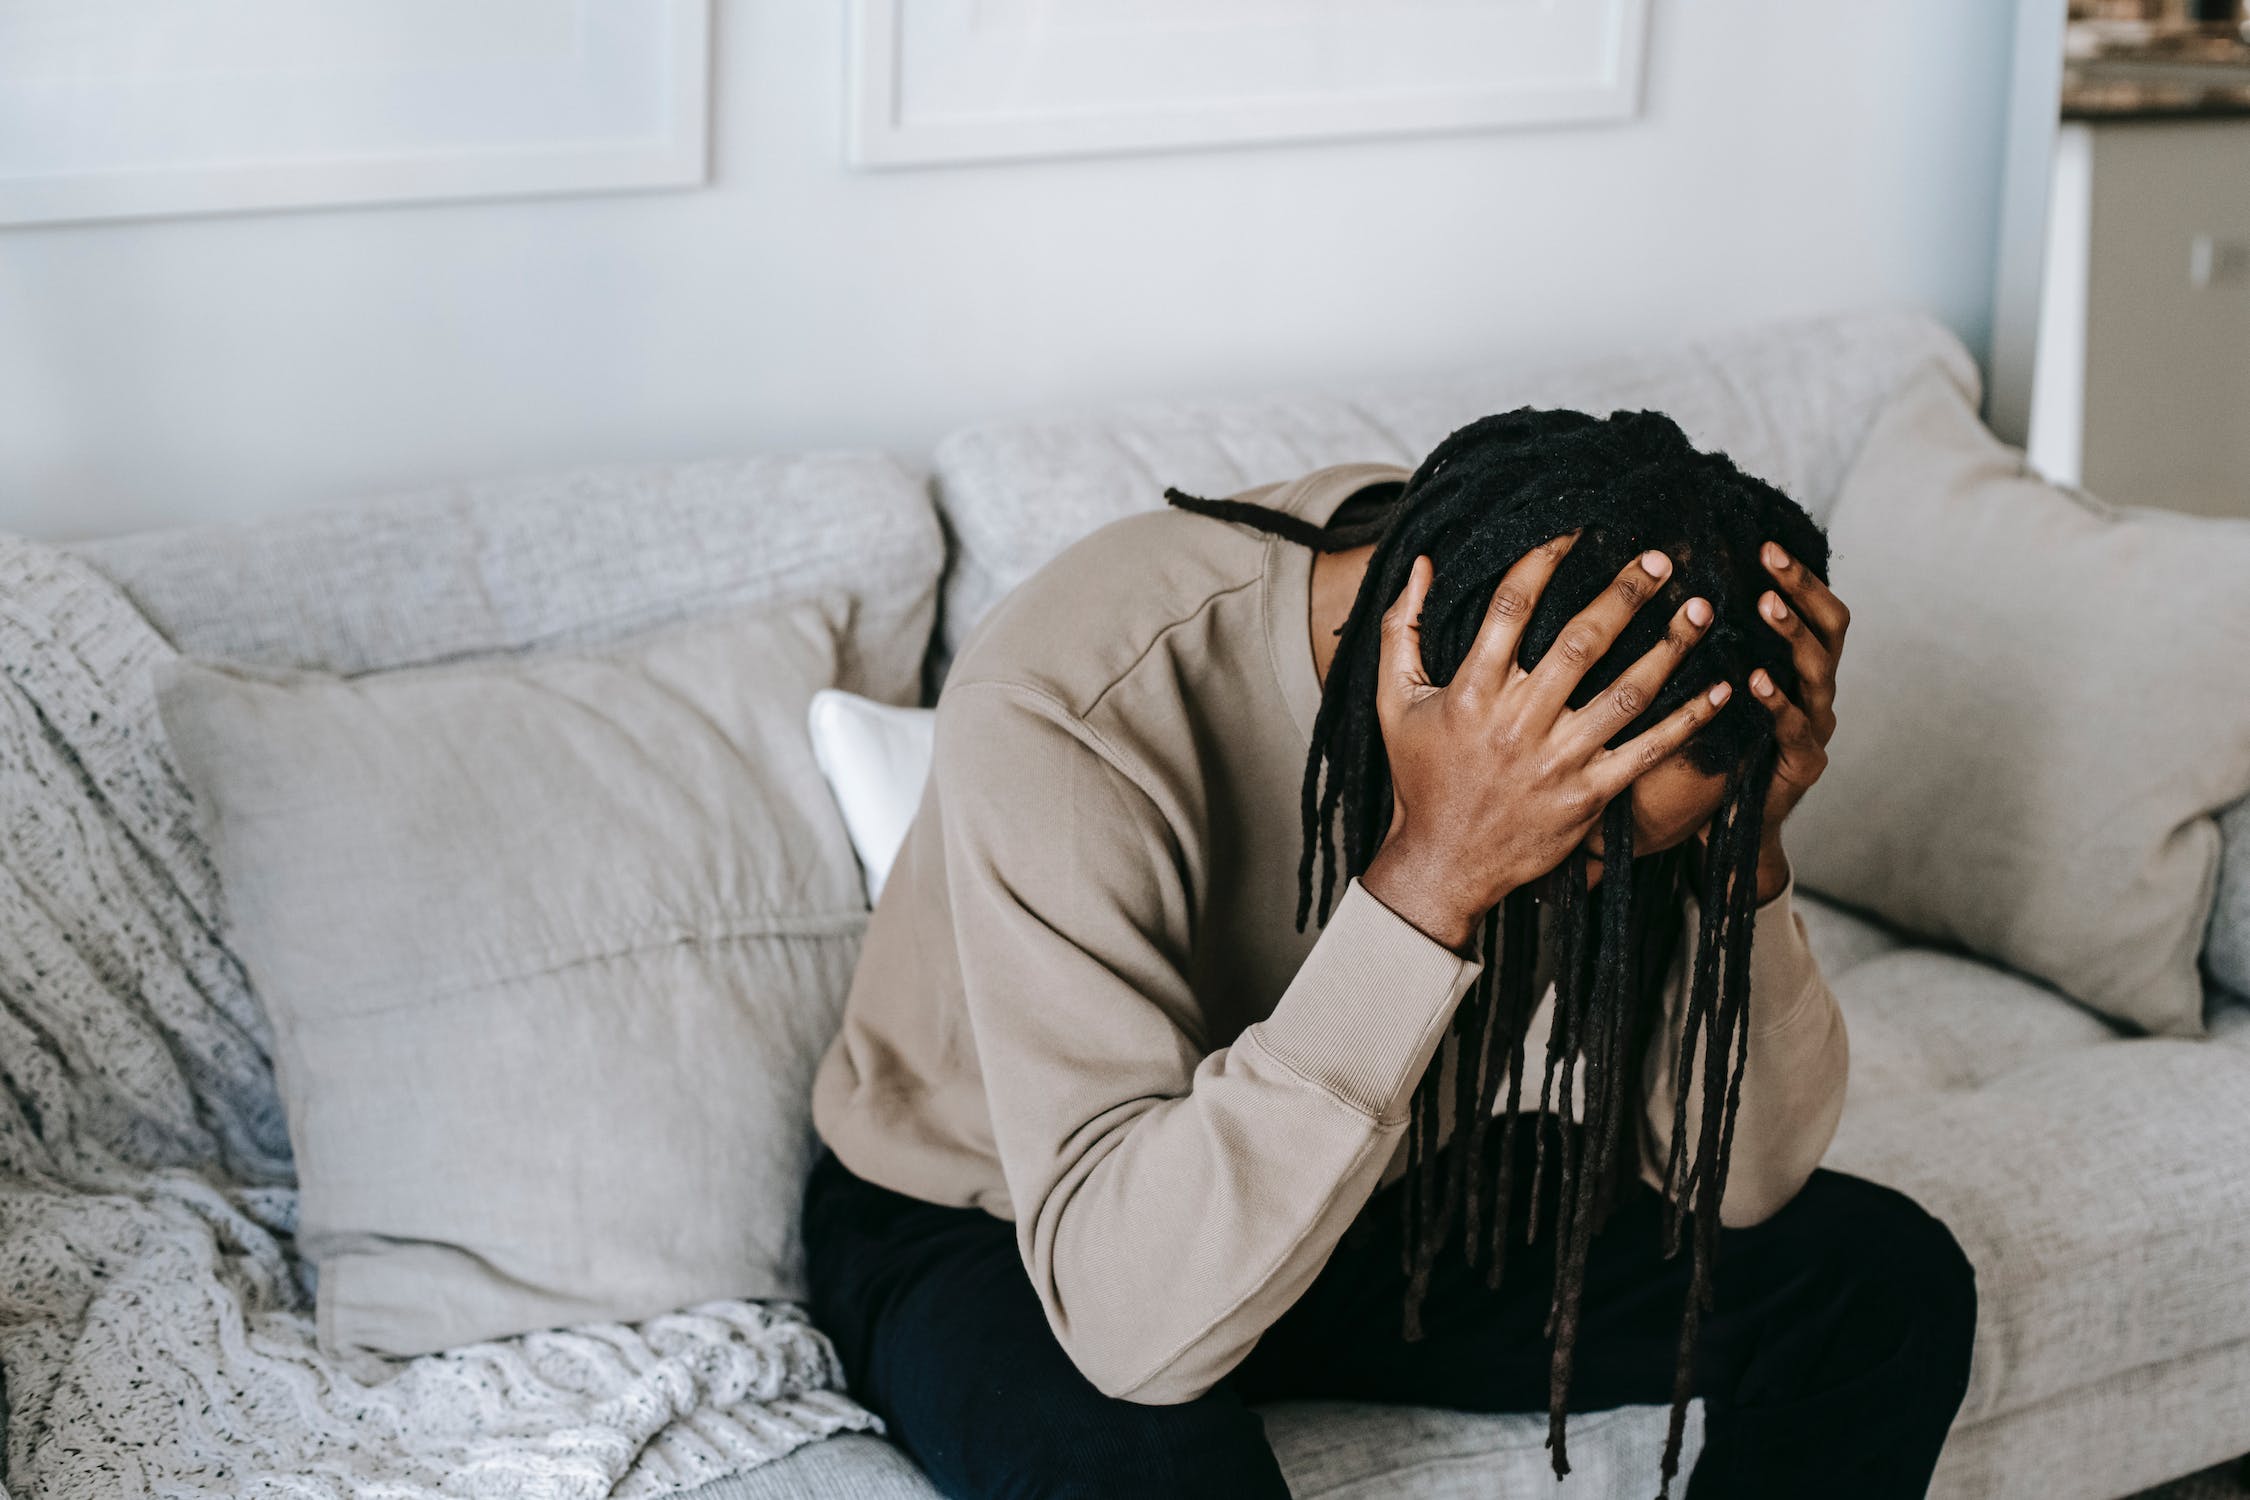 black guy with locs wearing beige sweater sitting on the light colored couch with head down and hands on his head